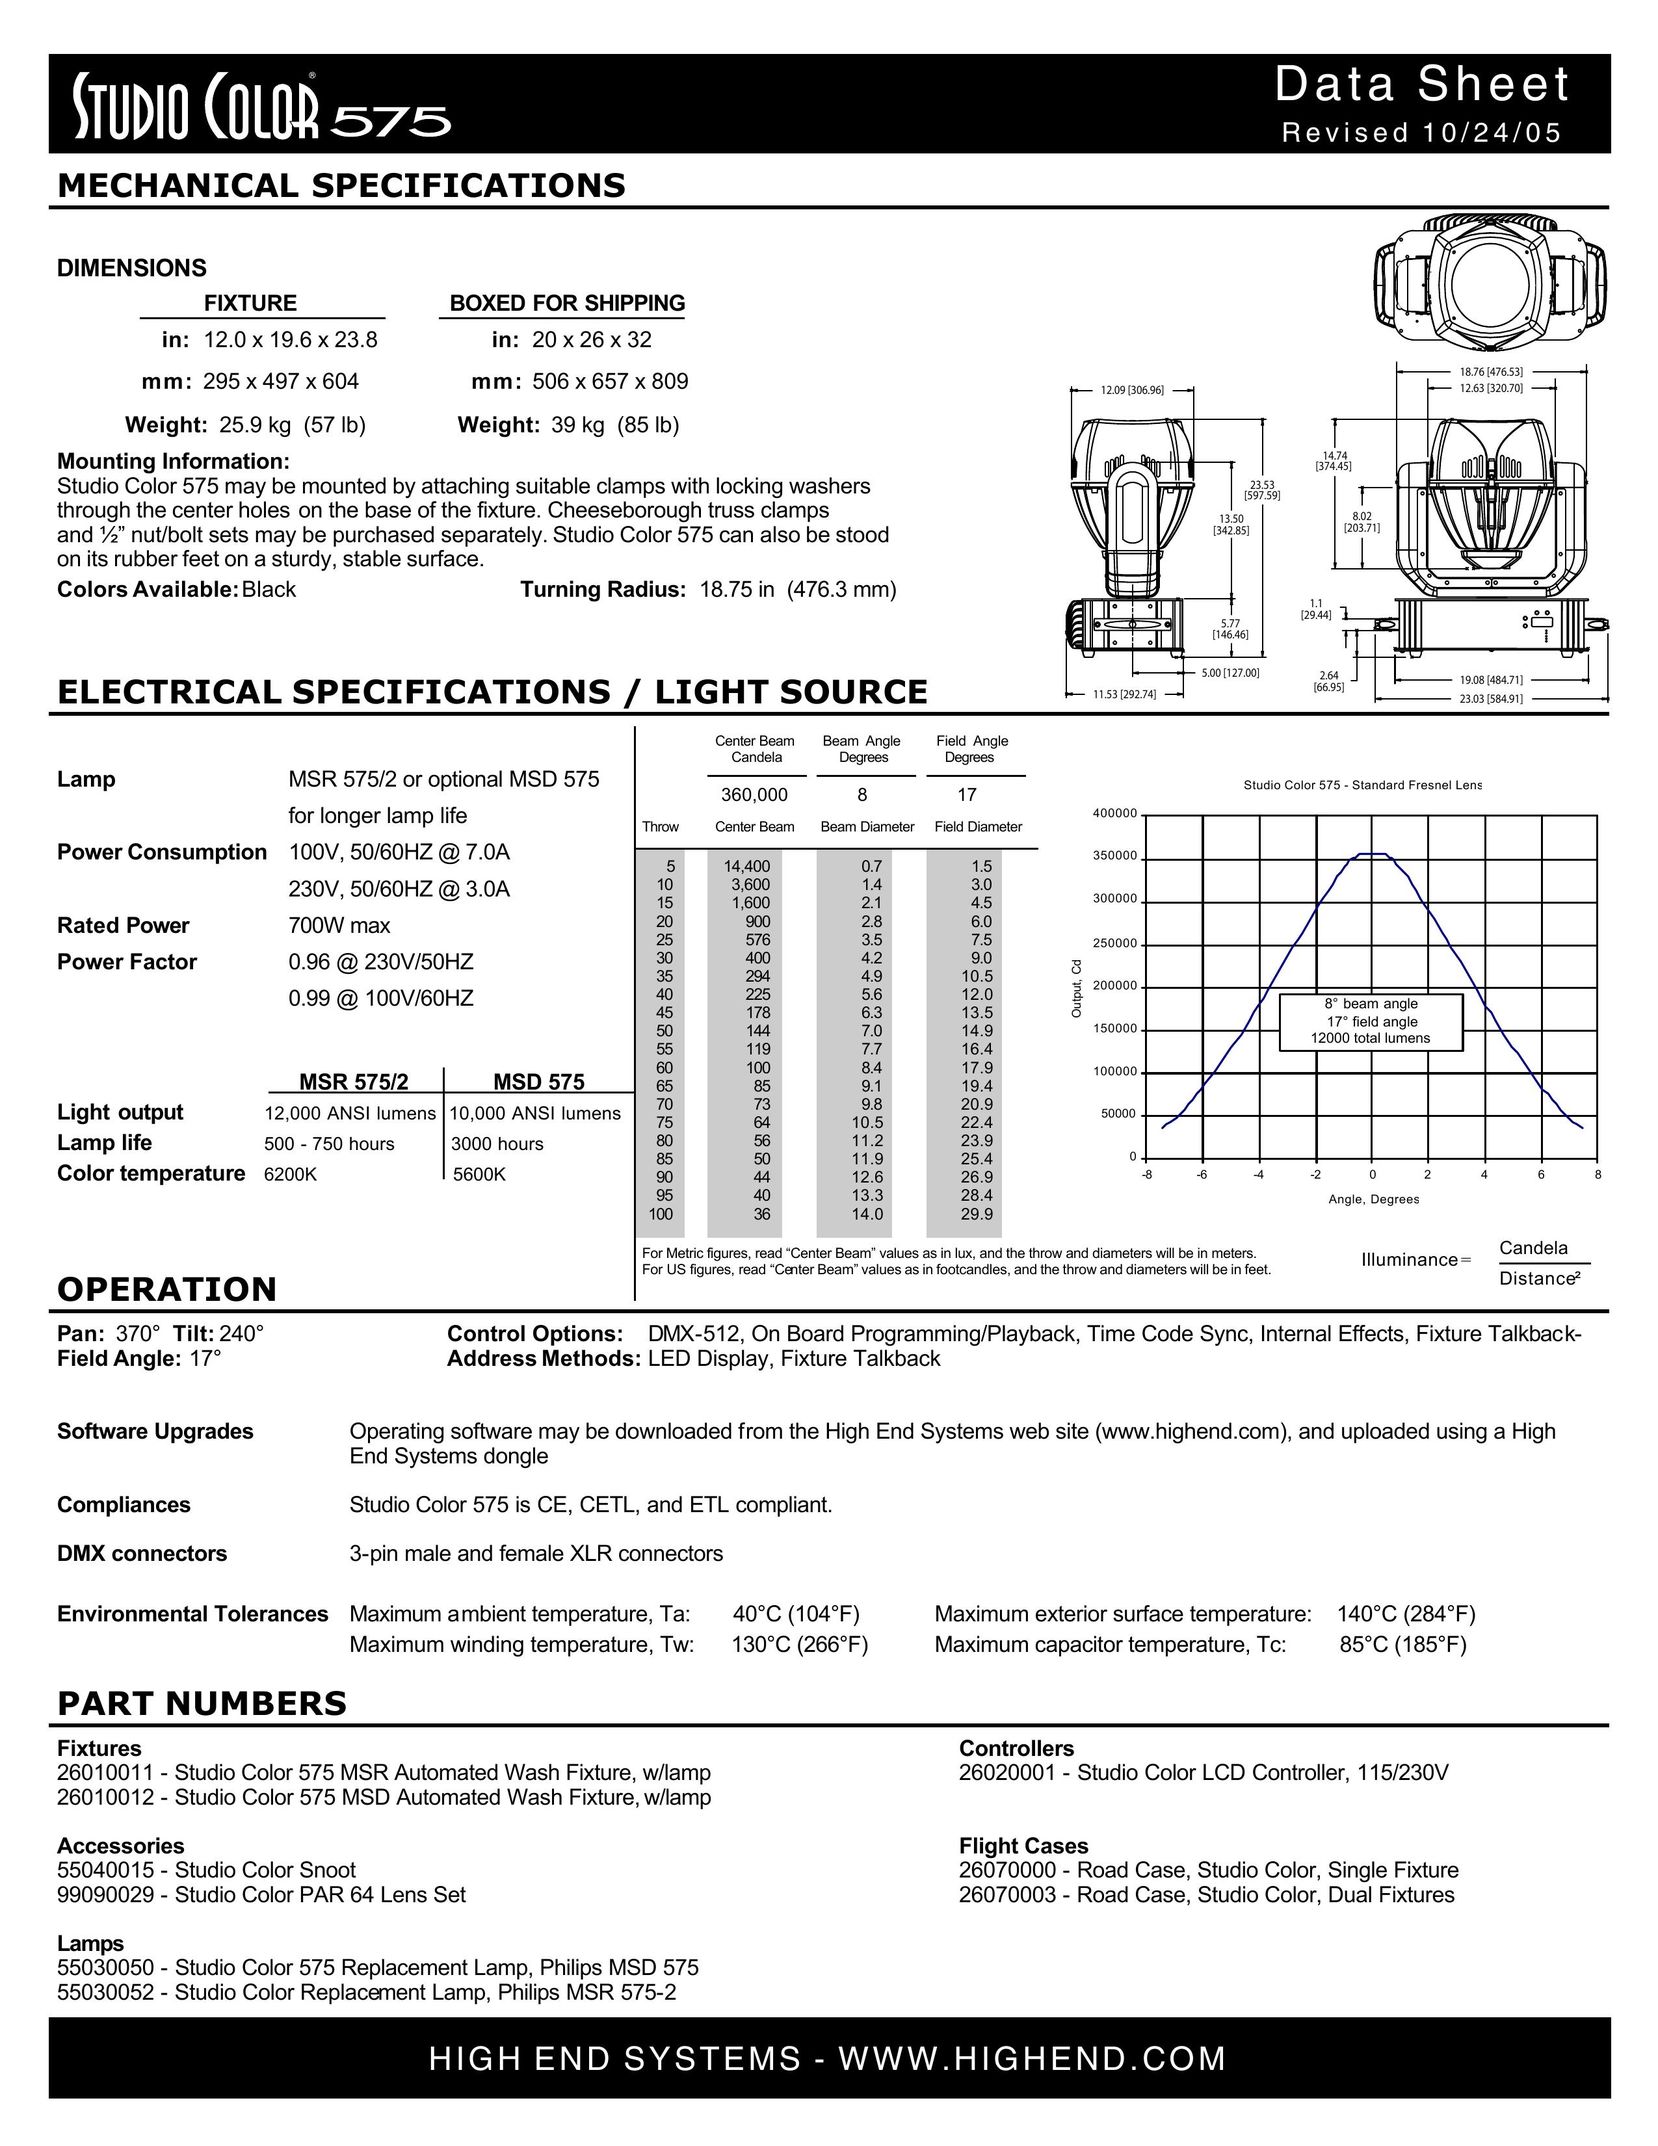 High End Systems MSD 575 Indoor Furnishings User Manual